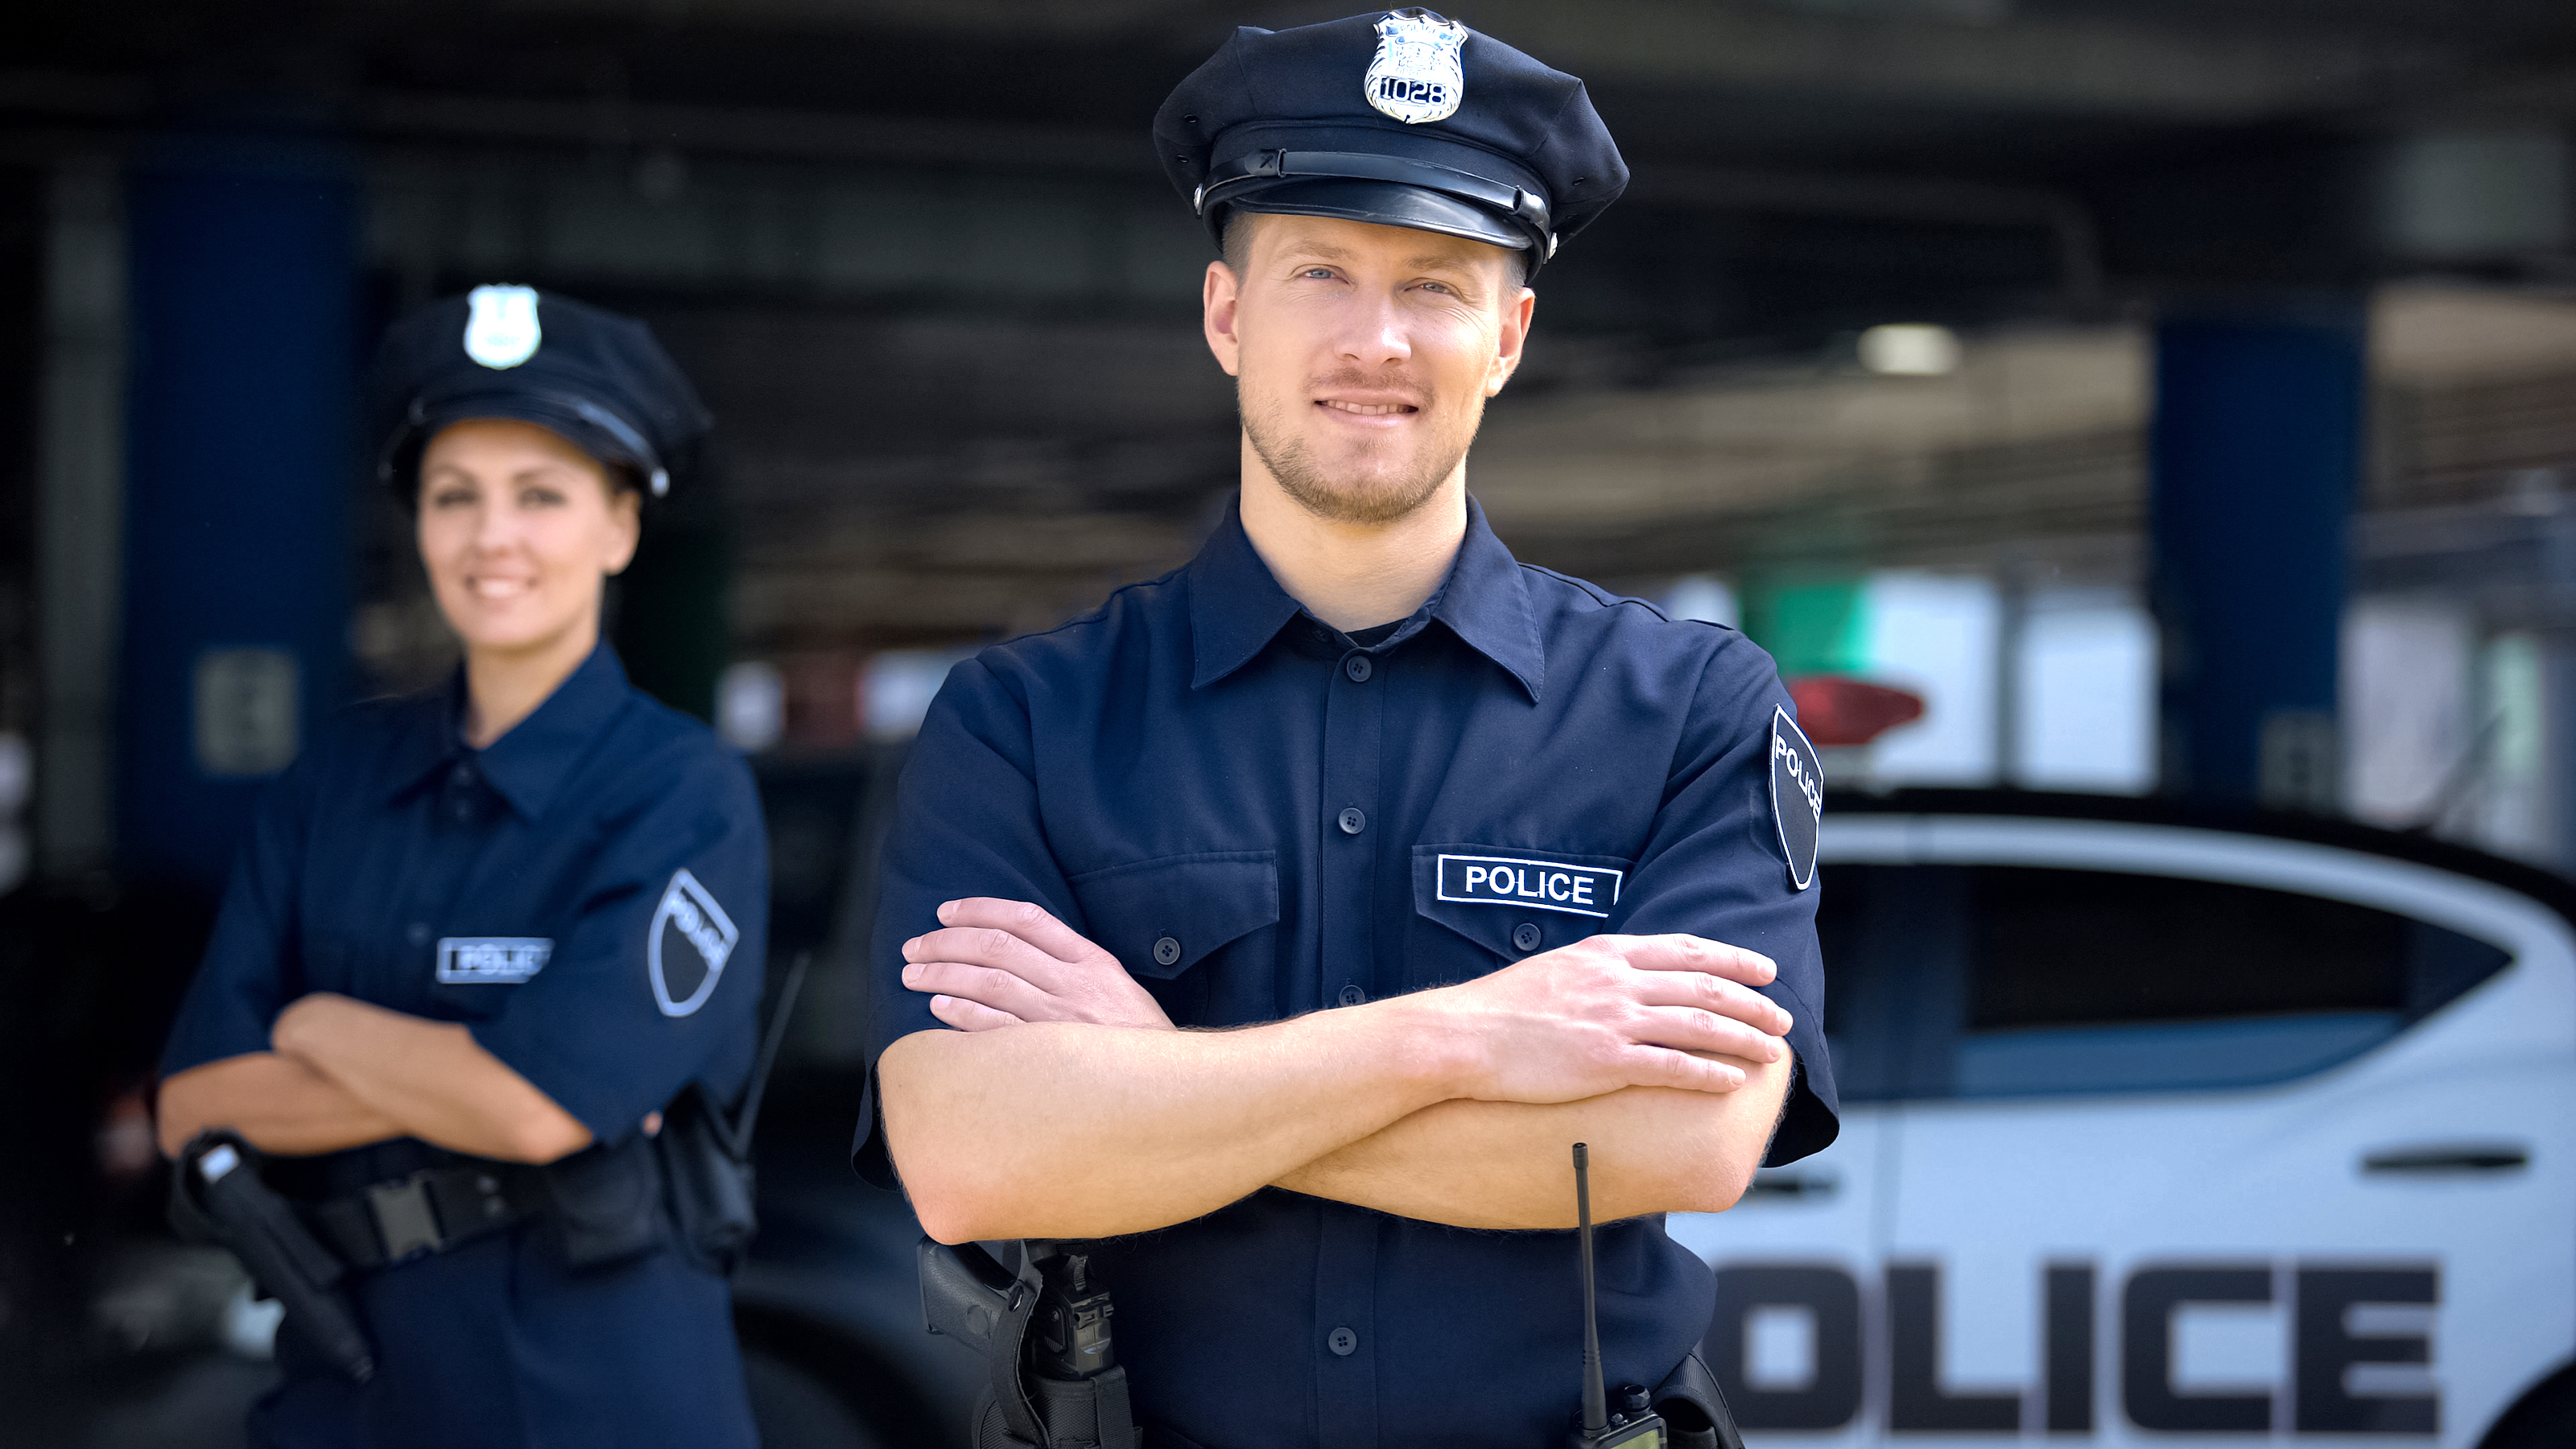 Polco and Guardian Alliance Technologies Announce Partnership Providing Data Solutions for Community Police Services and Hiring Decisionmaking